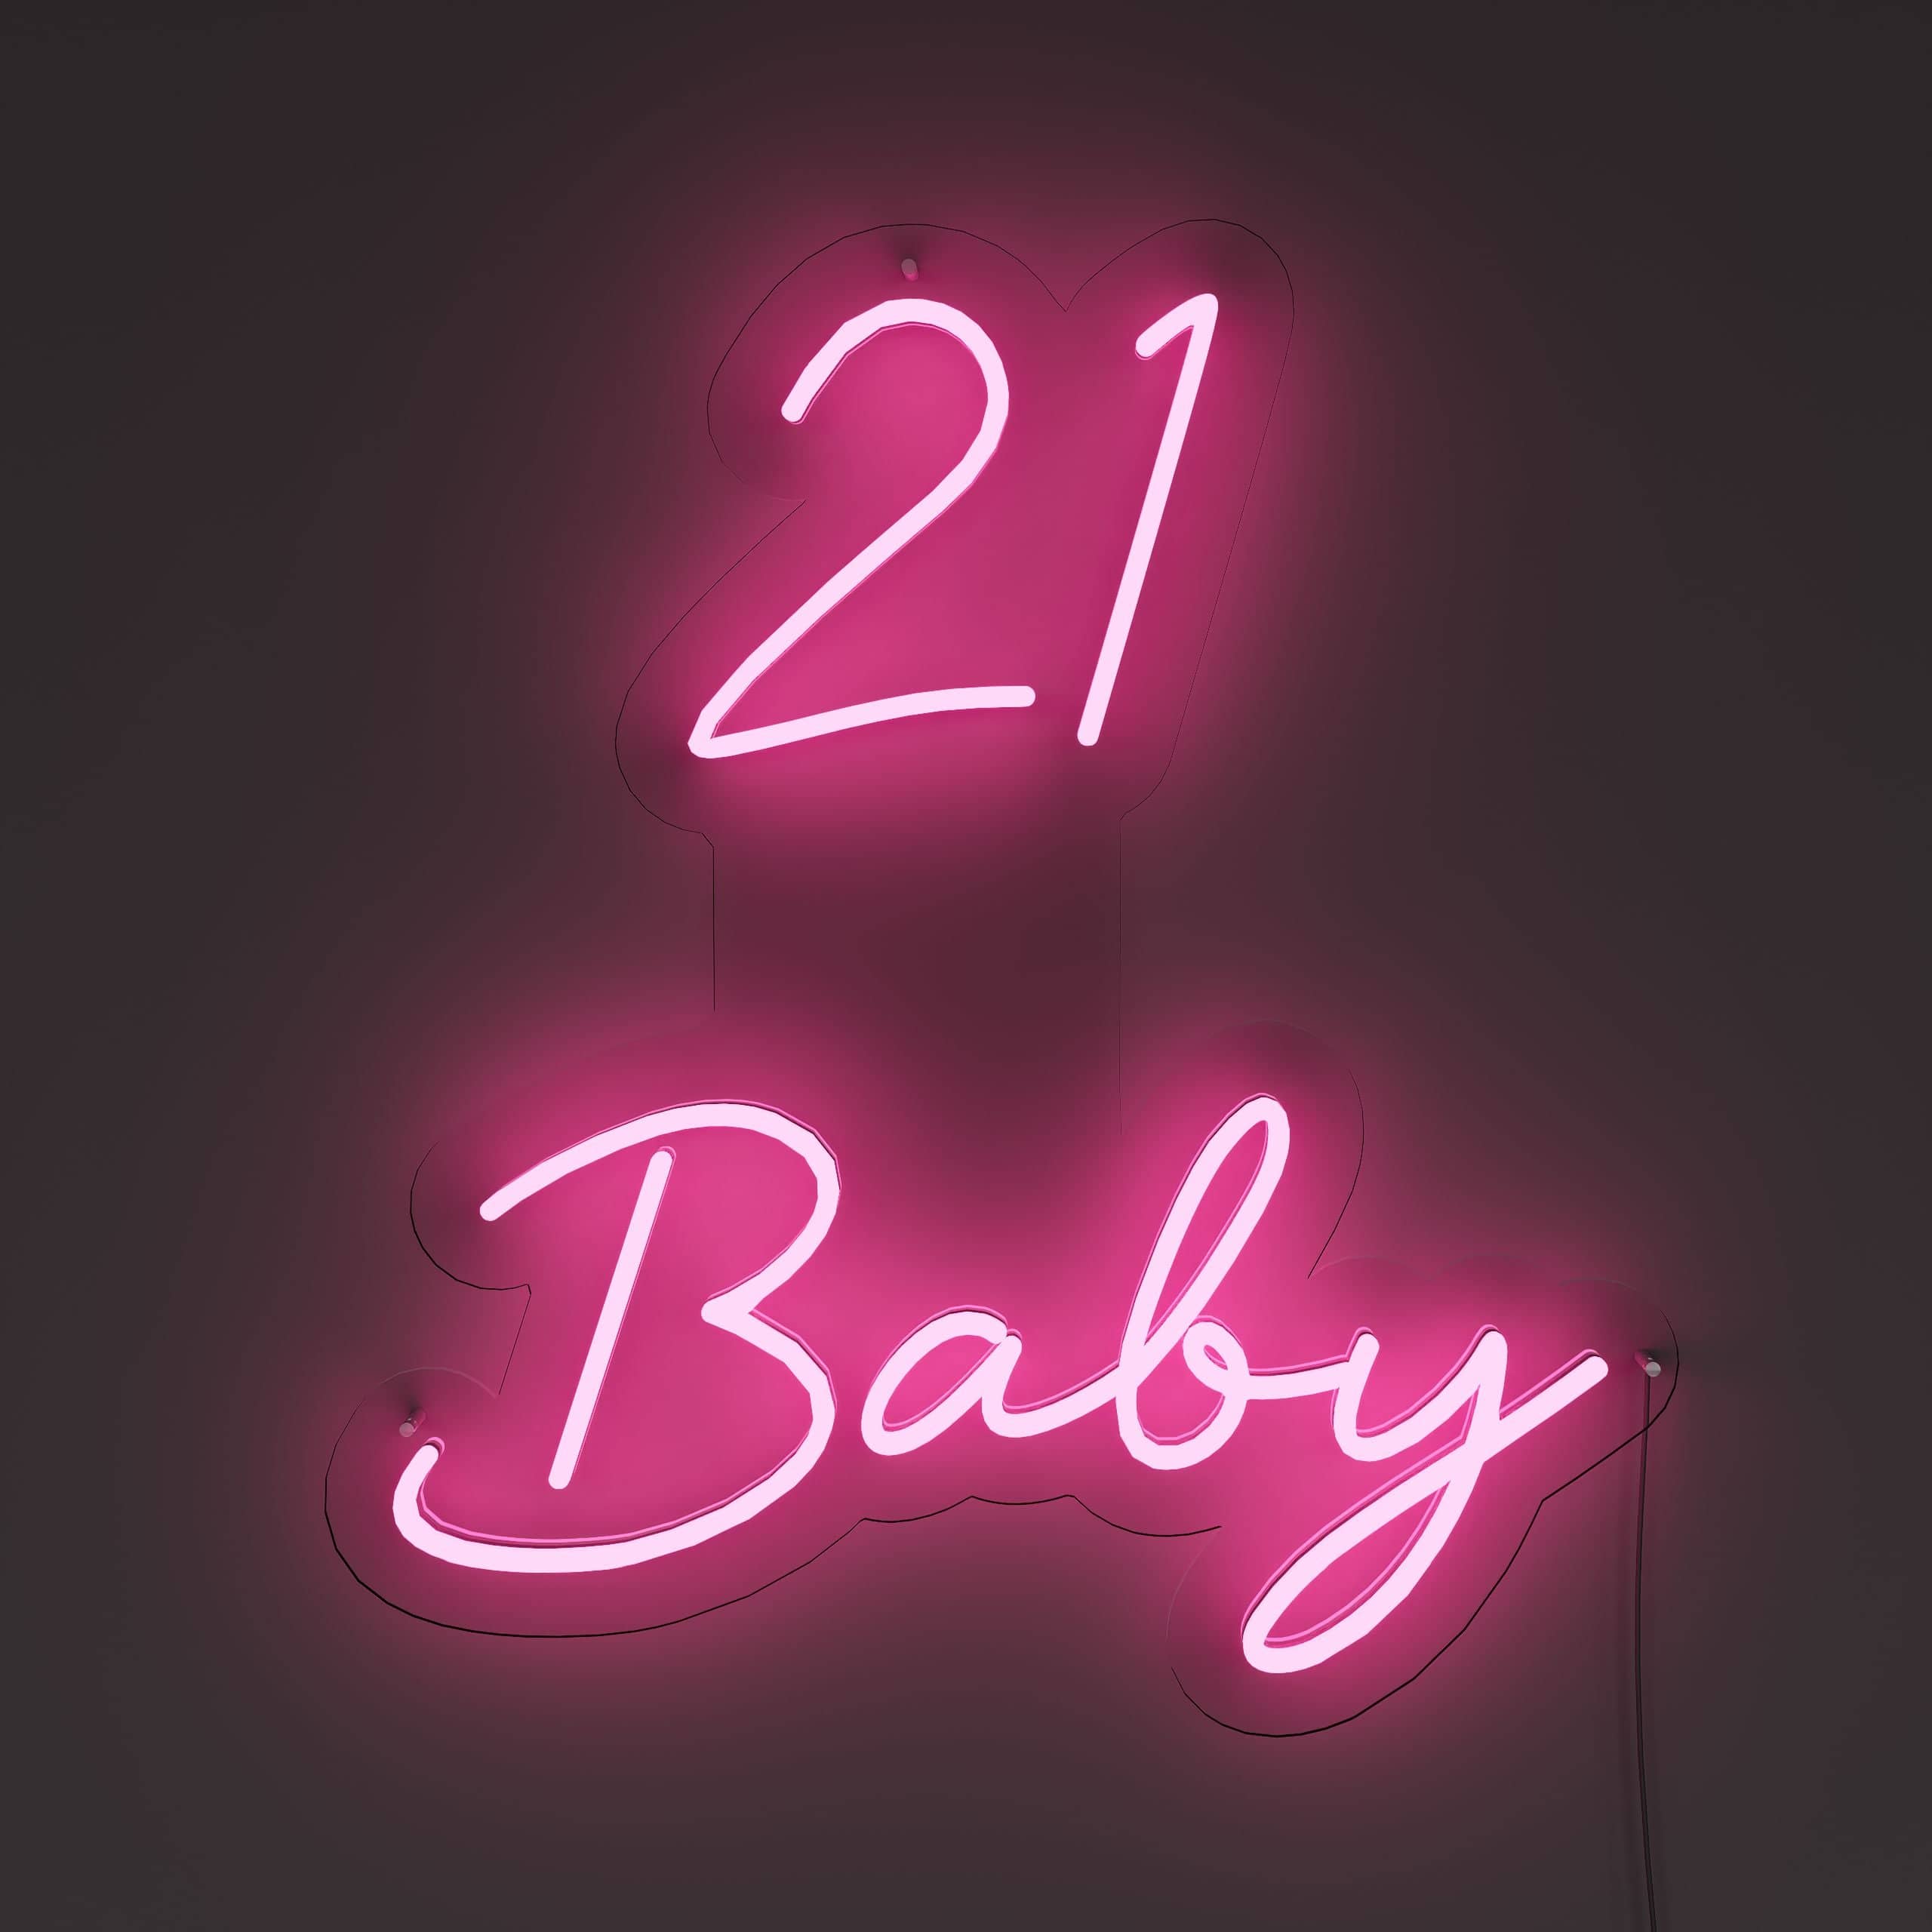 welcome-to-the-world-of-adulthood-at-21!-neon-sign-lite